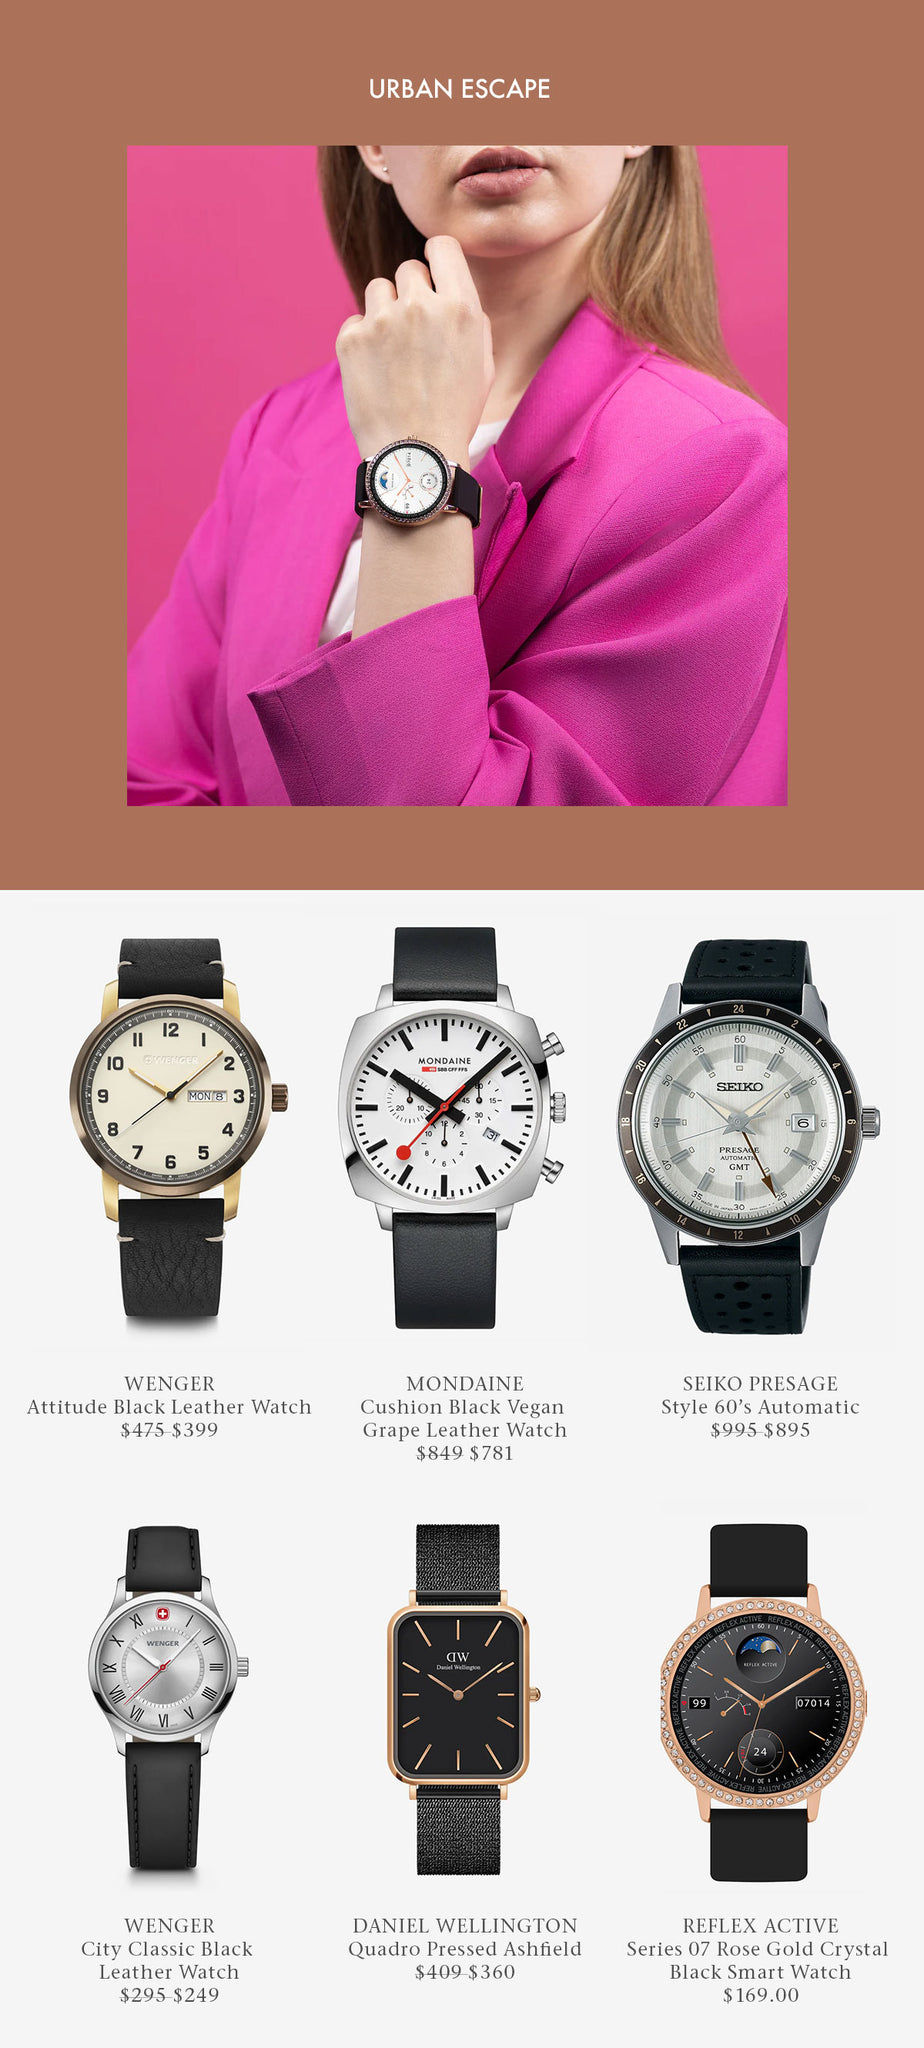 Shop watches perfect for an urban / city weekend escape